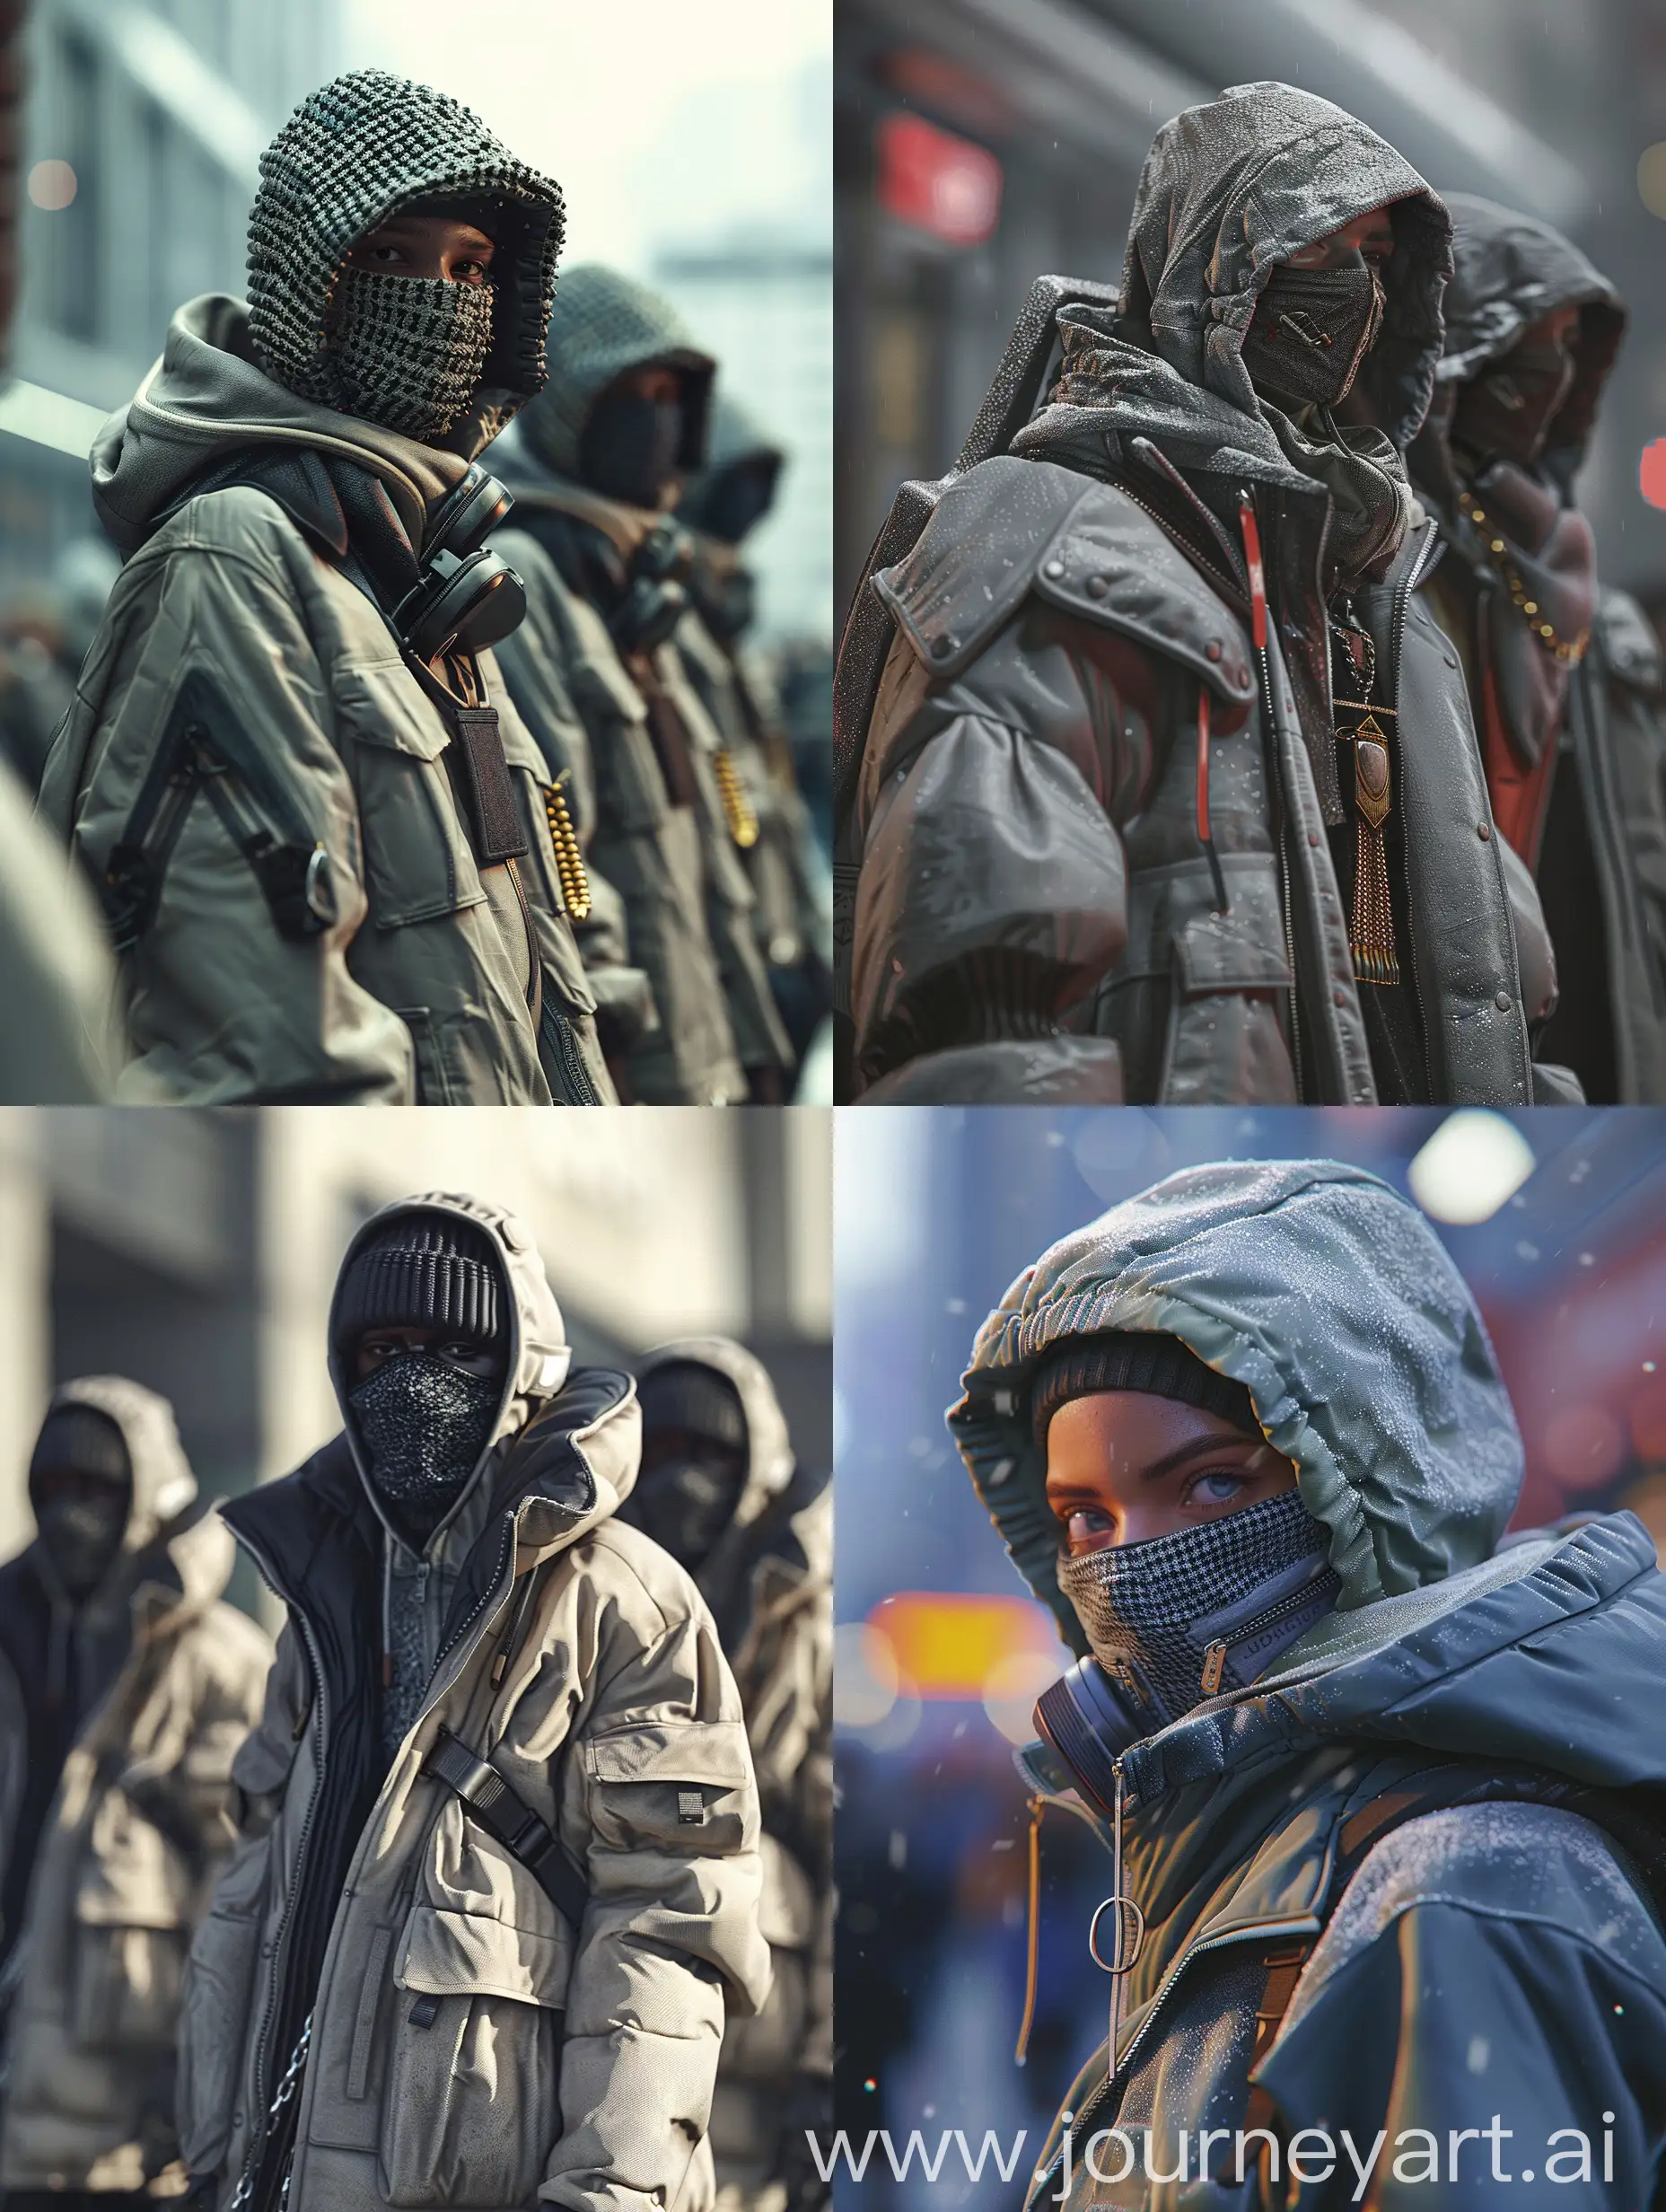 "Generate an ultra-realistic image reminiscent of Central Cee's style, featuring individuals adorned in oversized jackets and UK drill grime-inspired balaclavas, accessorized with meticulous attention to detail. Highlight the texture of the clothing and accessories, utilizing a dynamic interplay of camera angles and lighting to create a compelling visual narrative. Implement a skillful use of blur to enhance the atmosphere, focusing on the intricate textures of the clothing and accessories. Ensure a nuanced depiction that authentically captures the essence of UK drill grime fashion, incorporating the distinct elements of Central Cee's aesthetic."